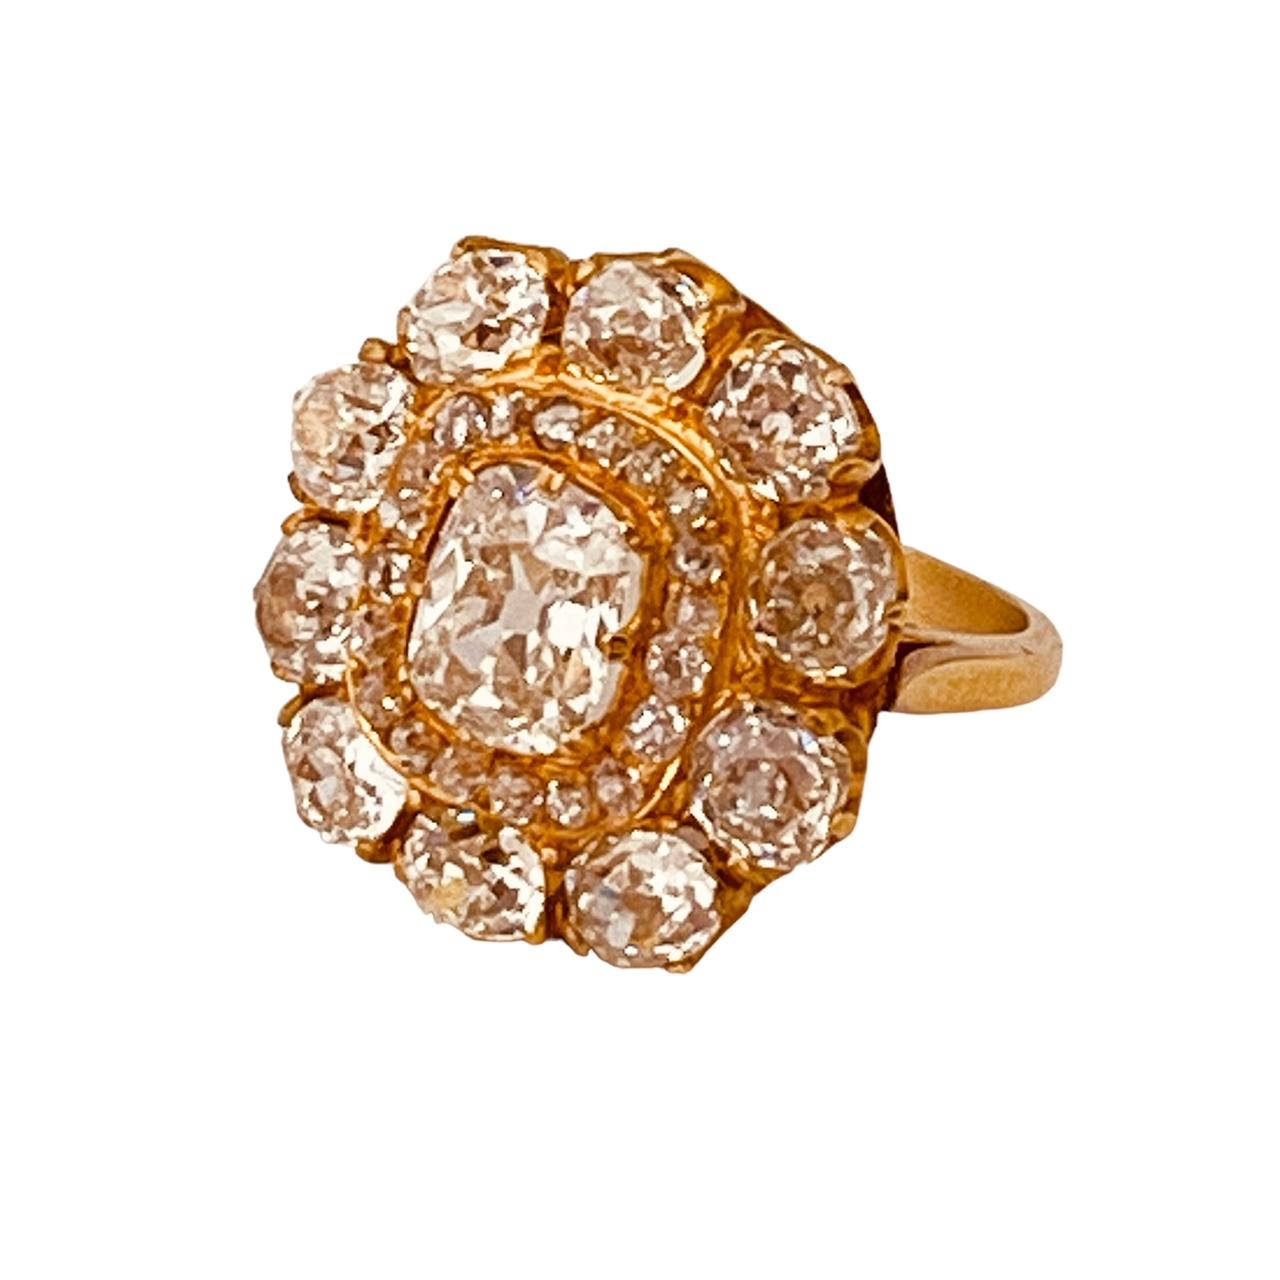 Antique Diamonds Cluster Ring With Central Old-Cut Cushion Weighing 1.35cts For Sale 12